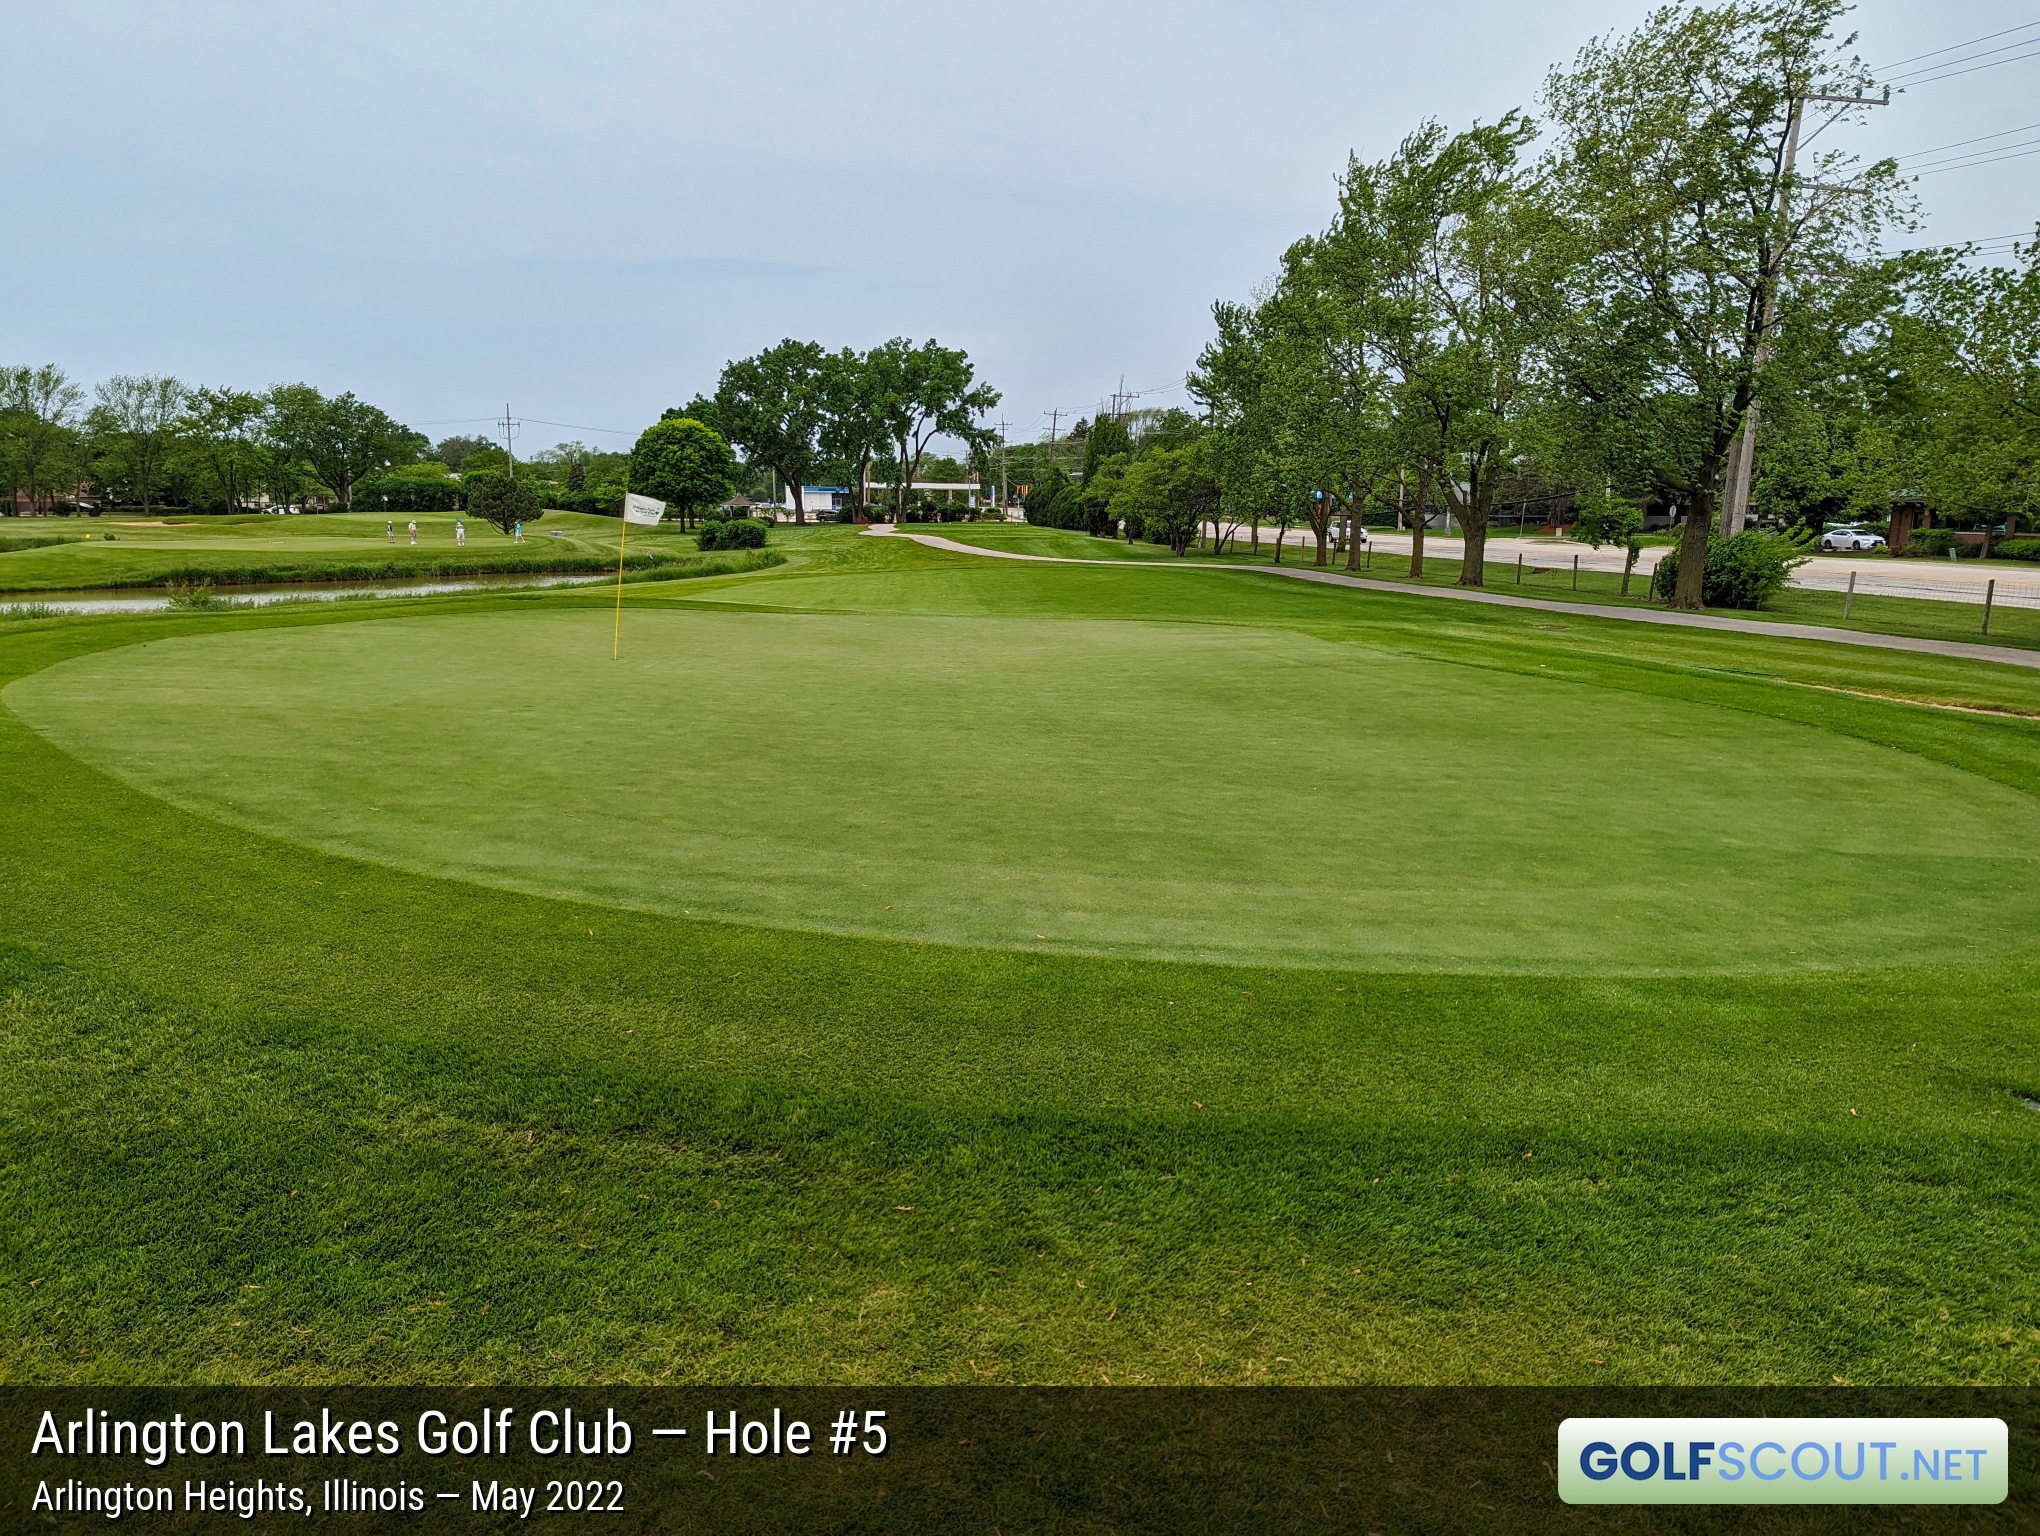 Photo of hole #5 at Arlington Lakes Golf Club in Arlington Heights, Illinois. View of the hole from the back of the green.